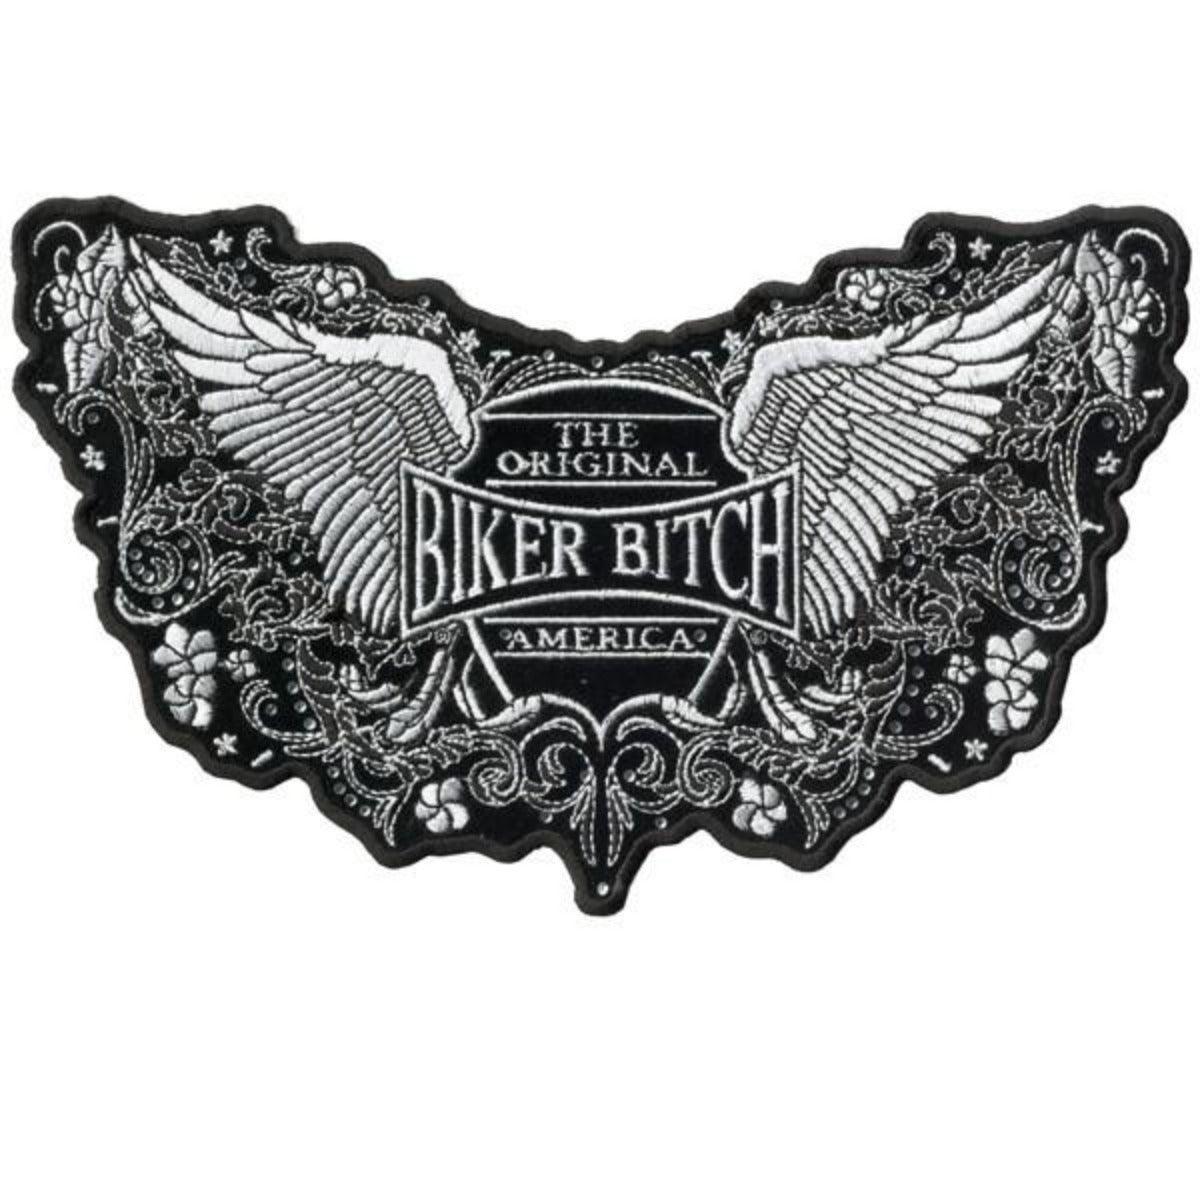 Hot Leathers Patch Ornate 5" - American Legend Rider